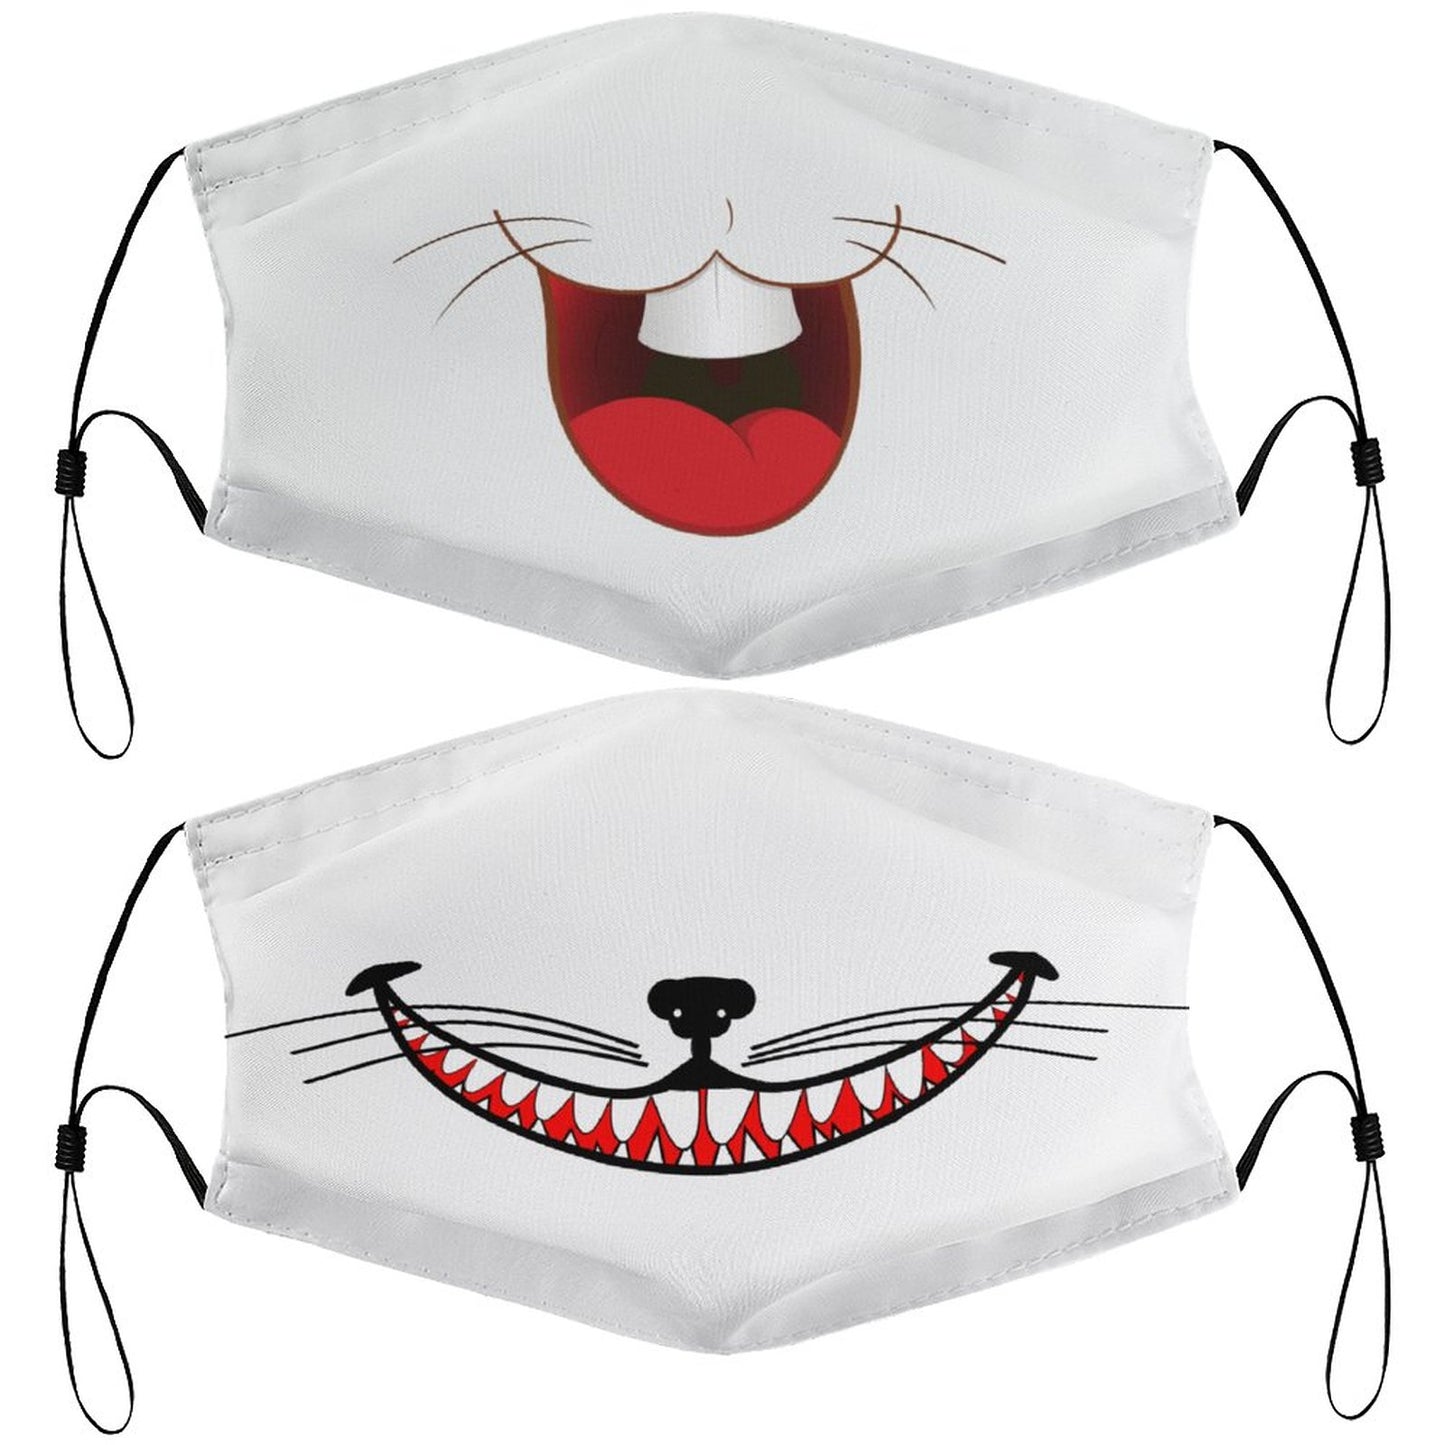 Online DIY Dust Mask with Filters Evil Smile Cat Expression Cartoon Smiling Face Expression 2 PCS